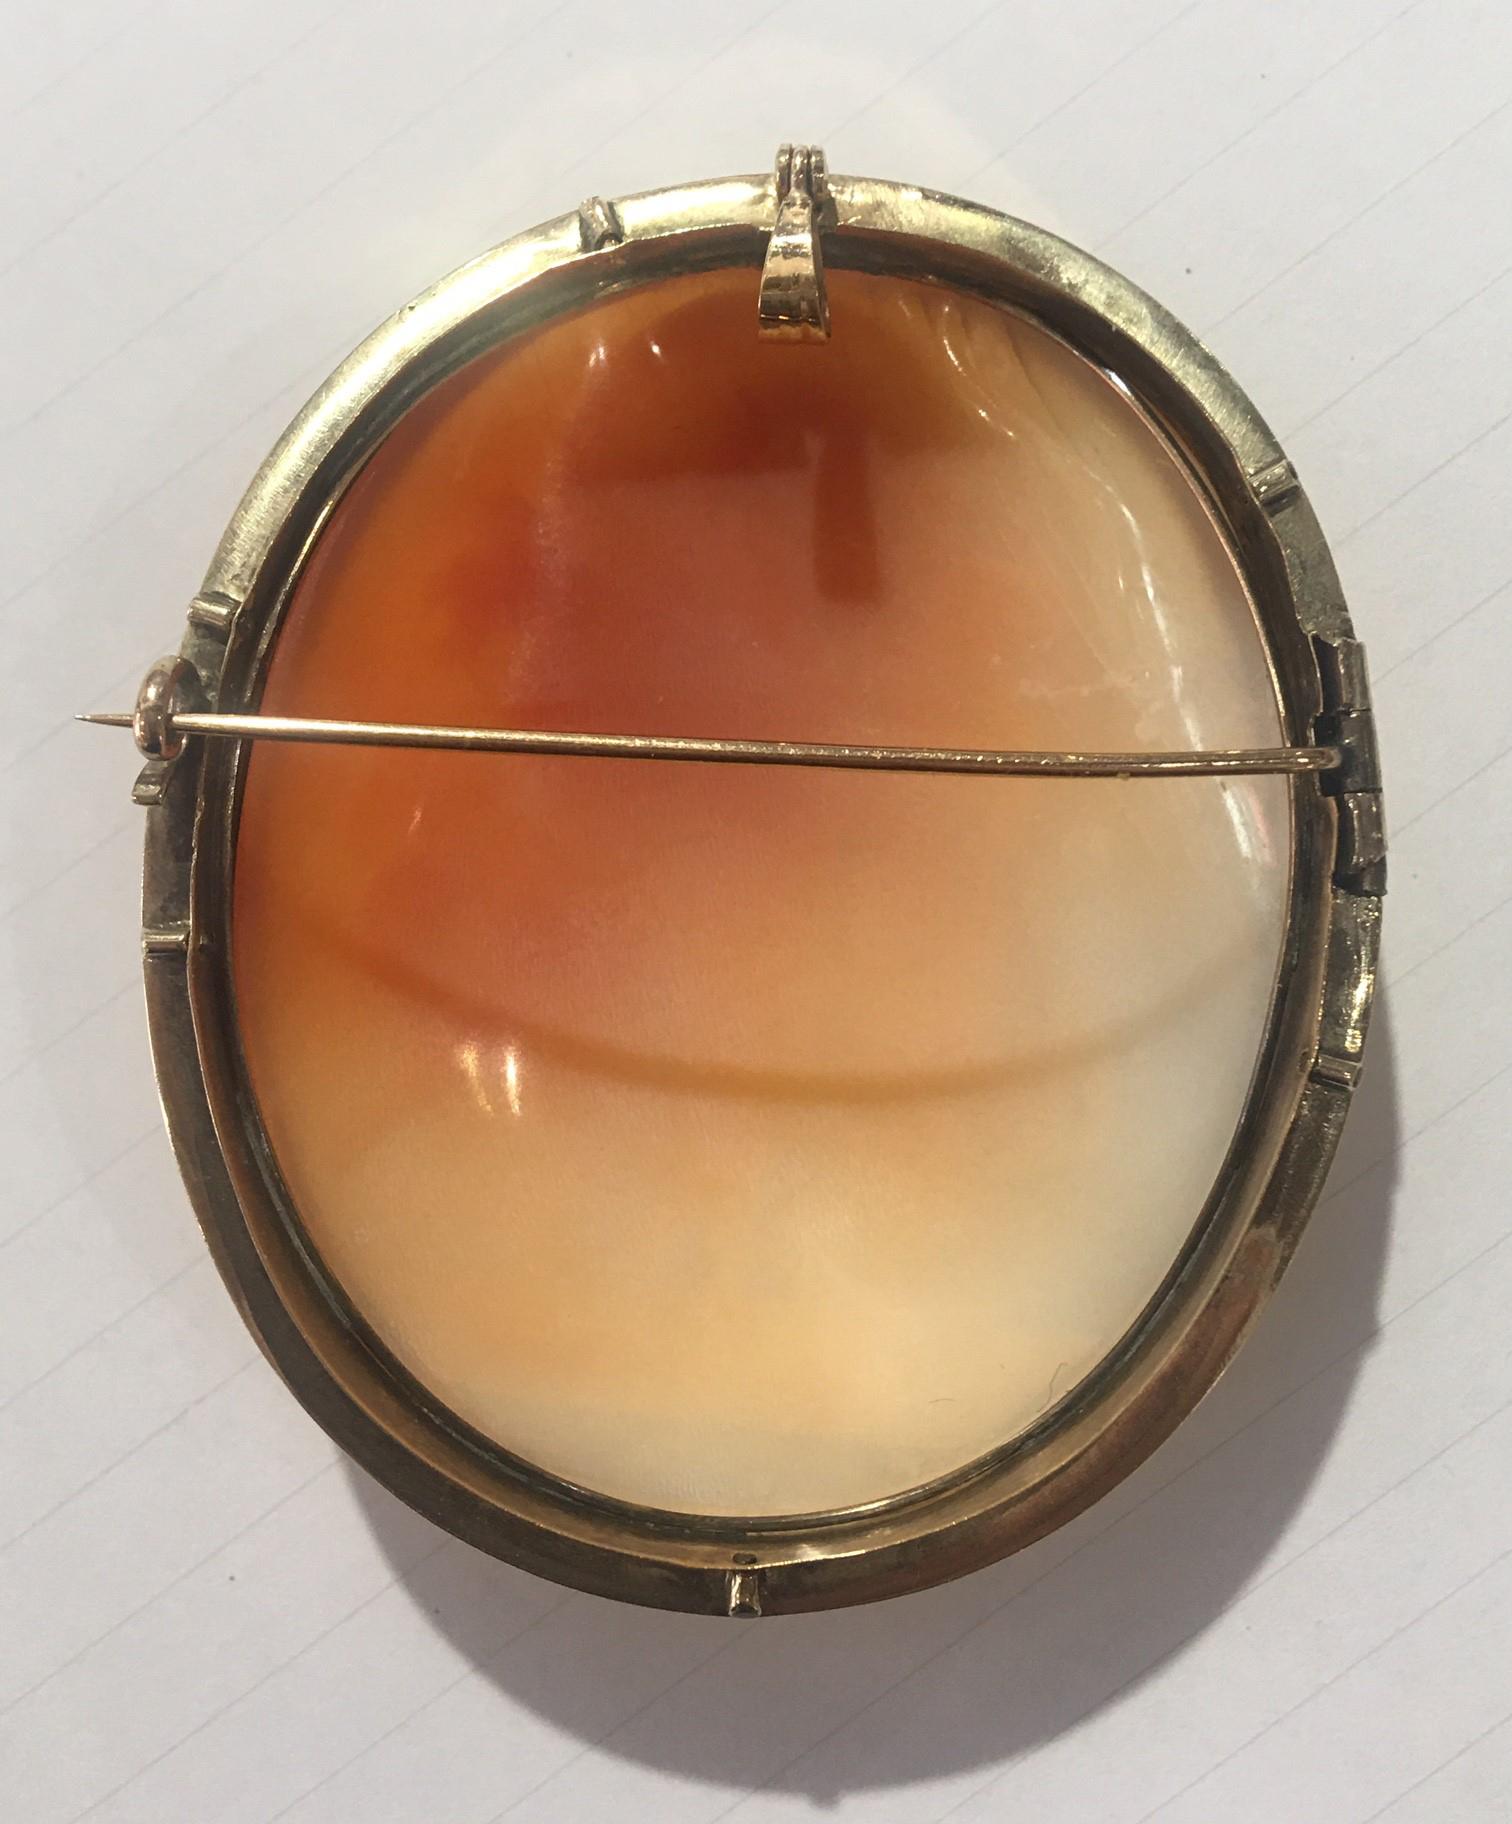 Elegant and Stylish Antique Cameo Brooch Pendant depicting The Three Graces; Beautifully Hand Carved in High Relief Estate piece; Meticulously artisan engraved with exquisite detail, this romantic natural carnelian shell cameo is set in a Beautiful